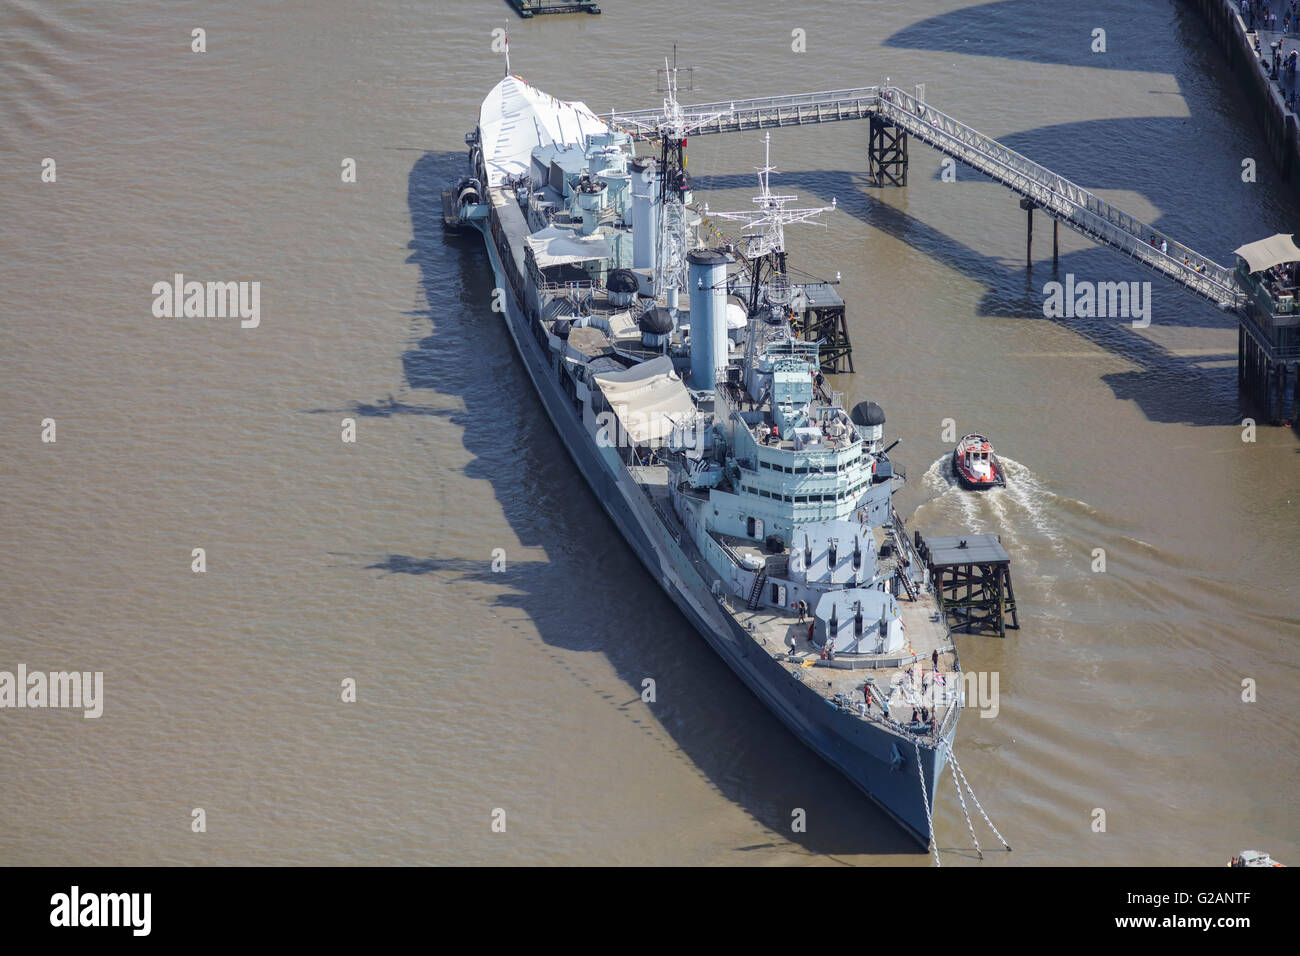 An aerial view of HMS Belfast a former Royal Navy light cruiser and now a London tourist attraction Stock Photo